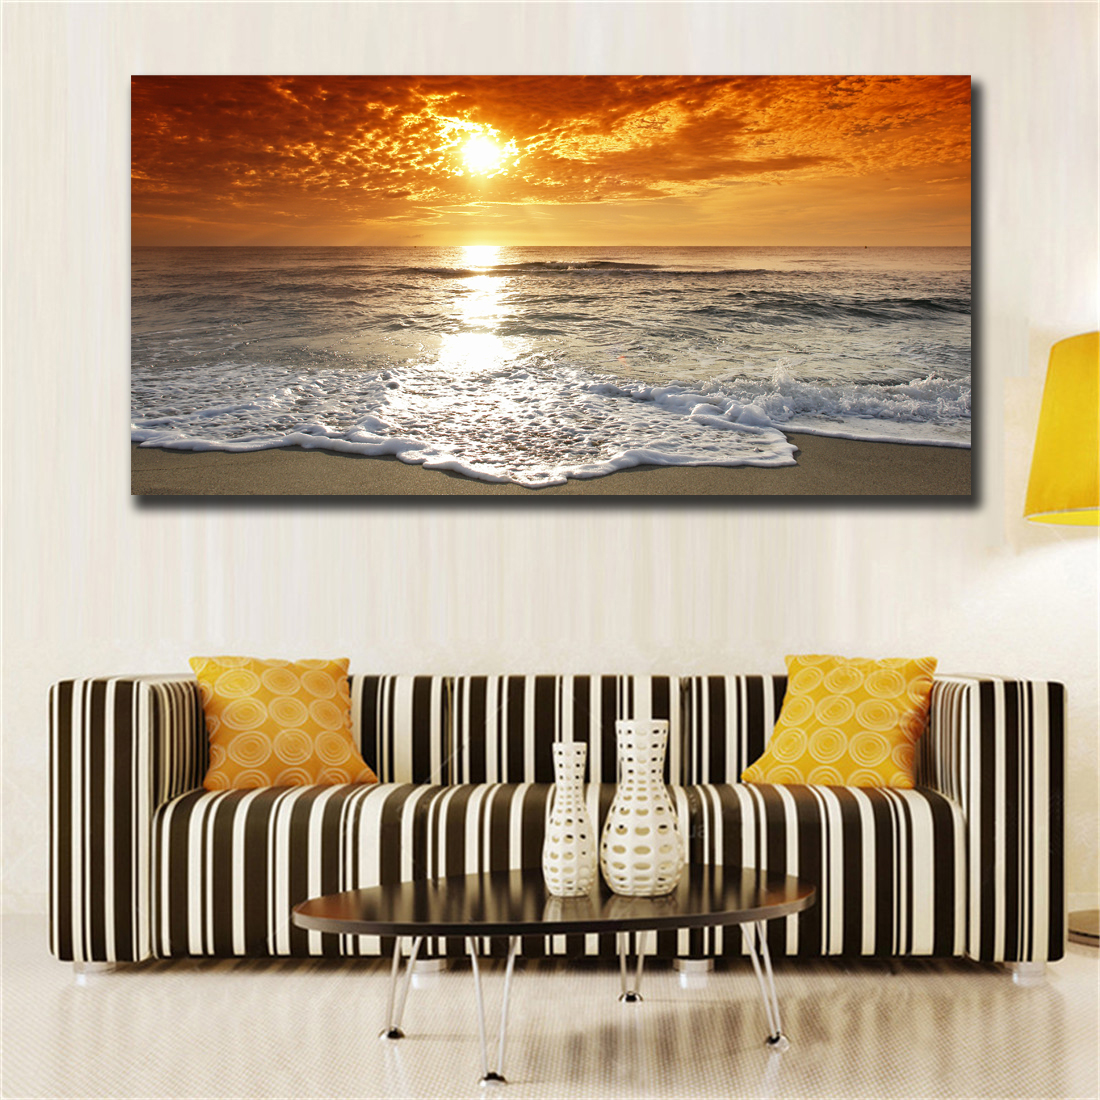 

Wall Pictures for Living Room Oil Painting Posters prints On Canvas Wall Deco Wall Decor No Framed #072